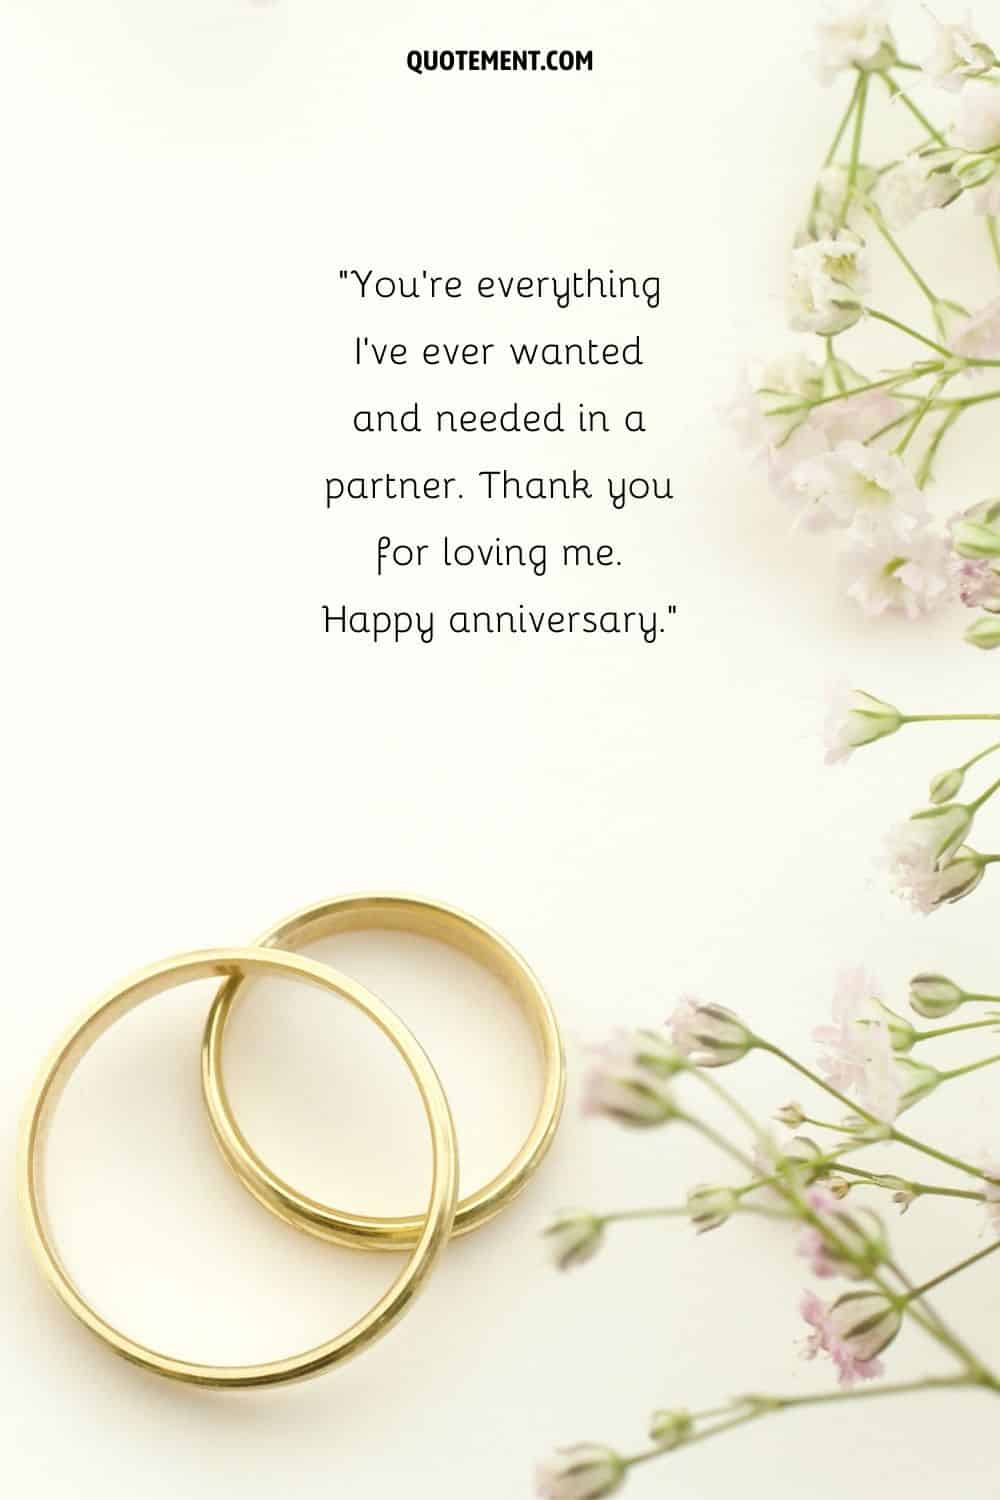 golden wedding rings representing wedding anniversary quote for wife